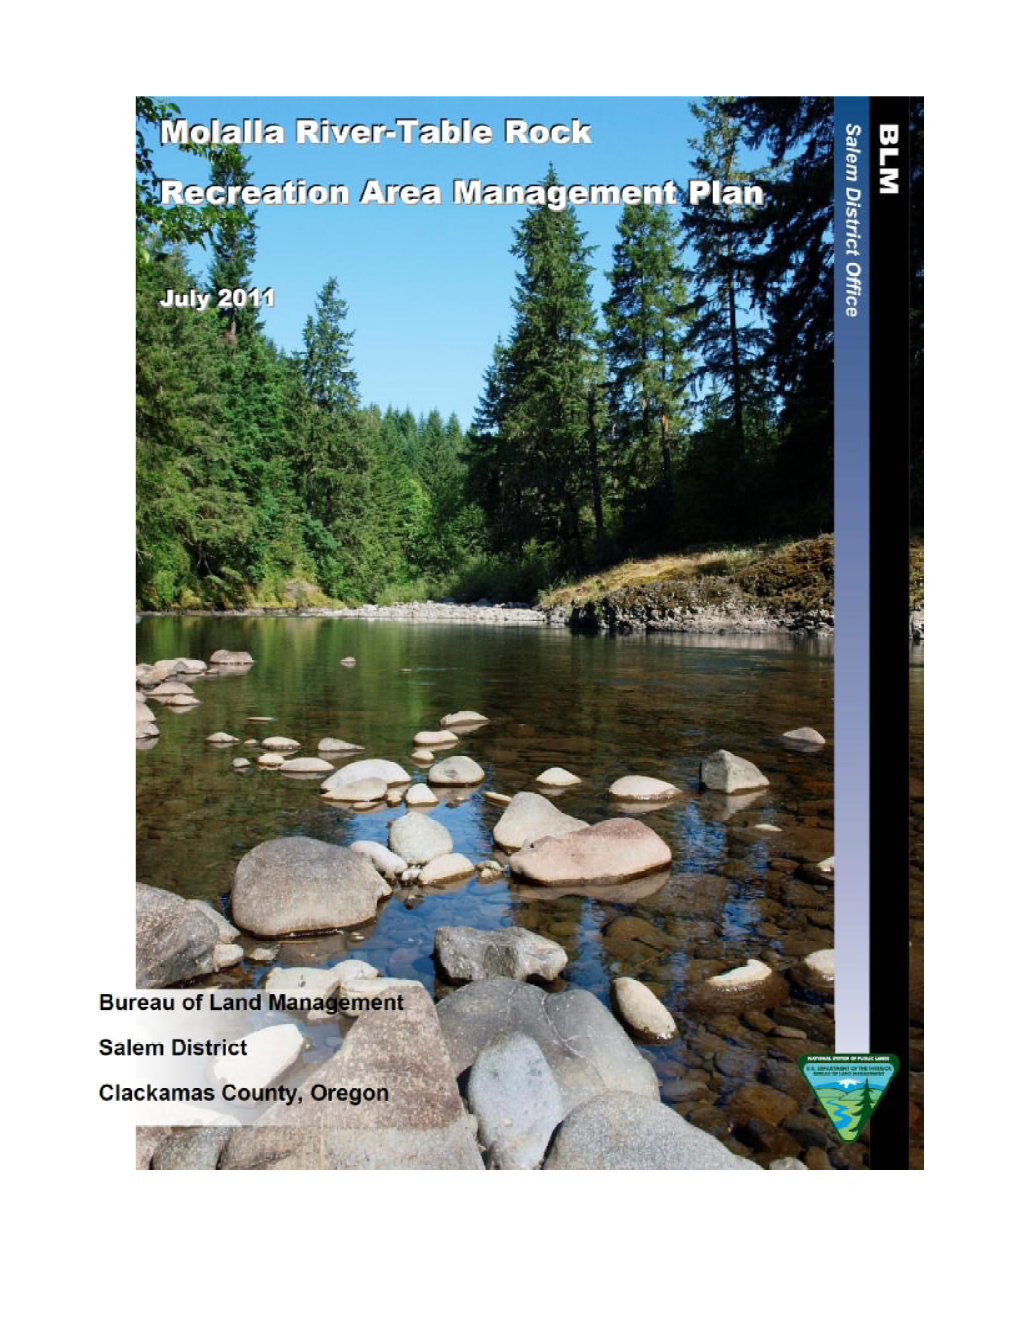 Molalla River-Table Rock Recreation Area Management Plan and Decision Record